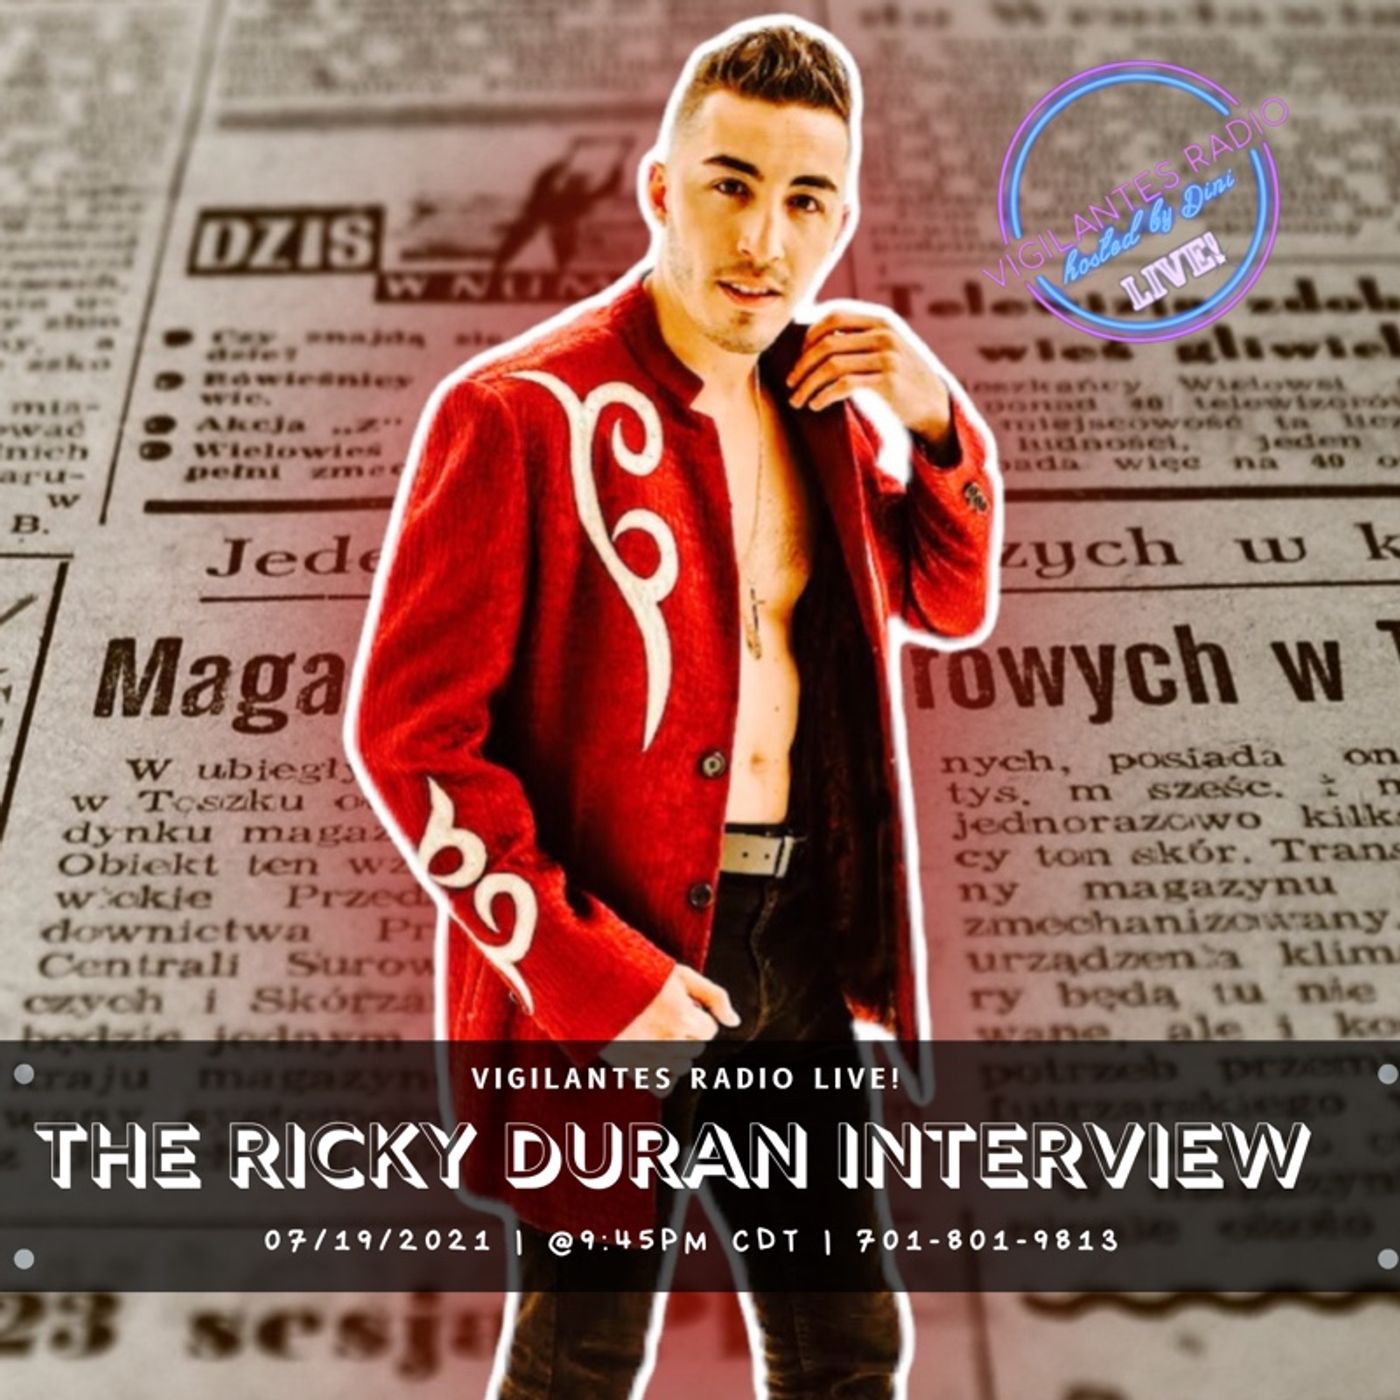 The Ricky Duran Interview. Image